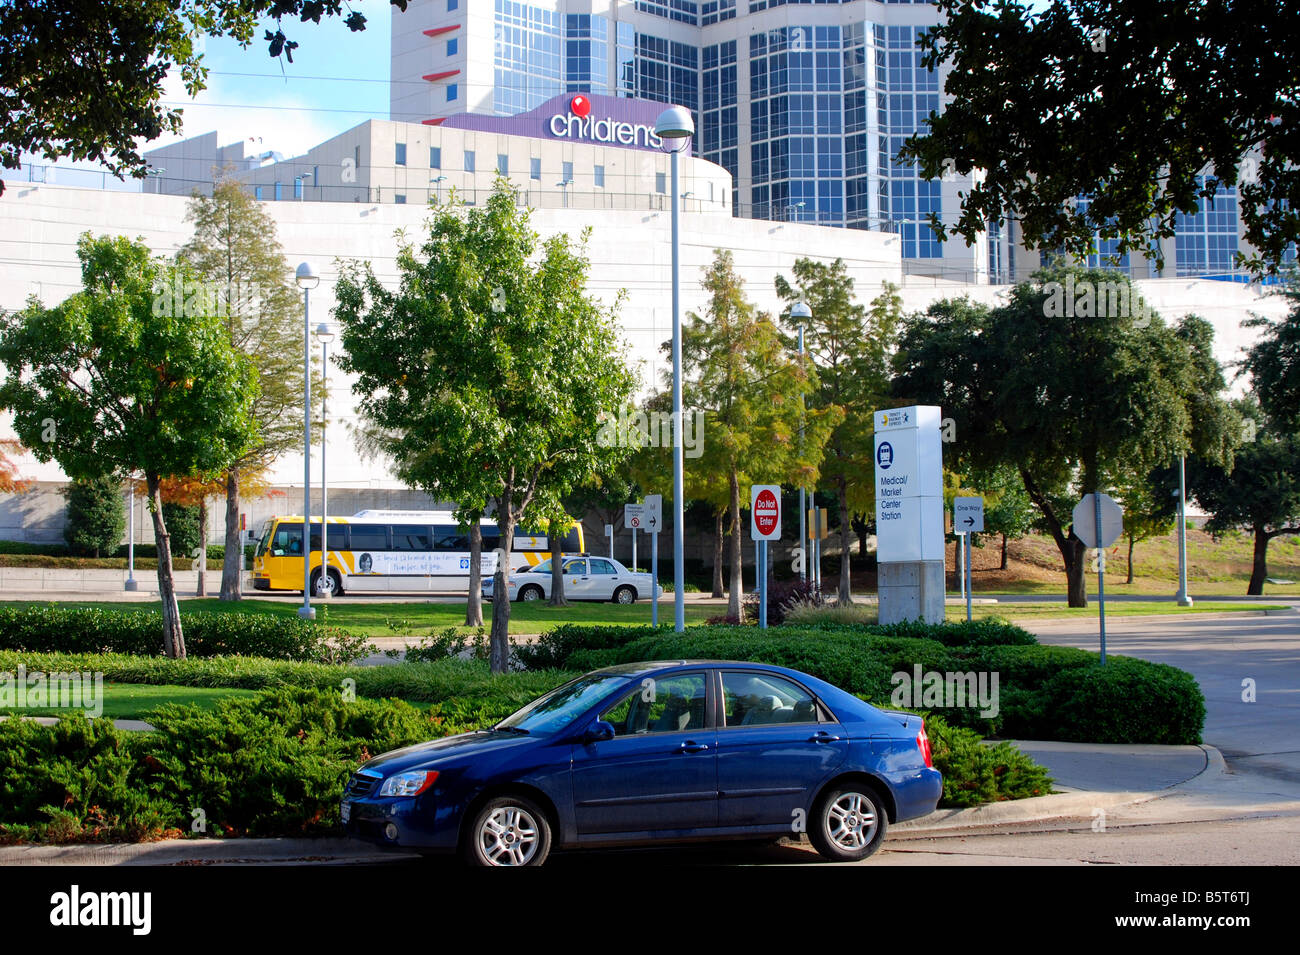 Car in front of children's medical center in Dallas, Texas Stock Photo